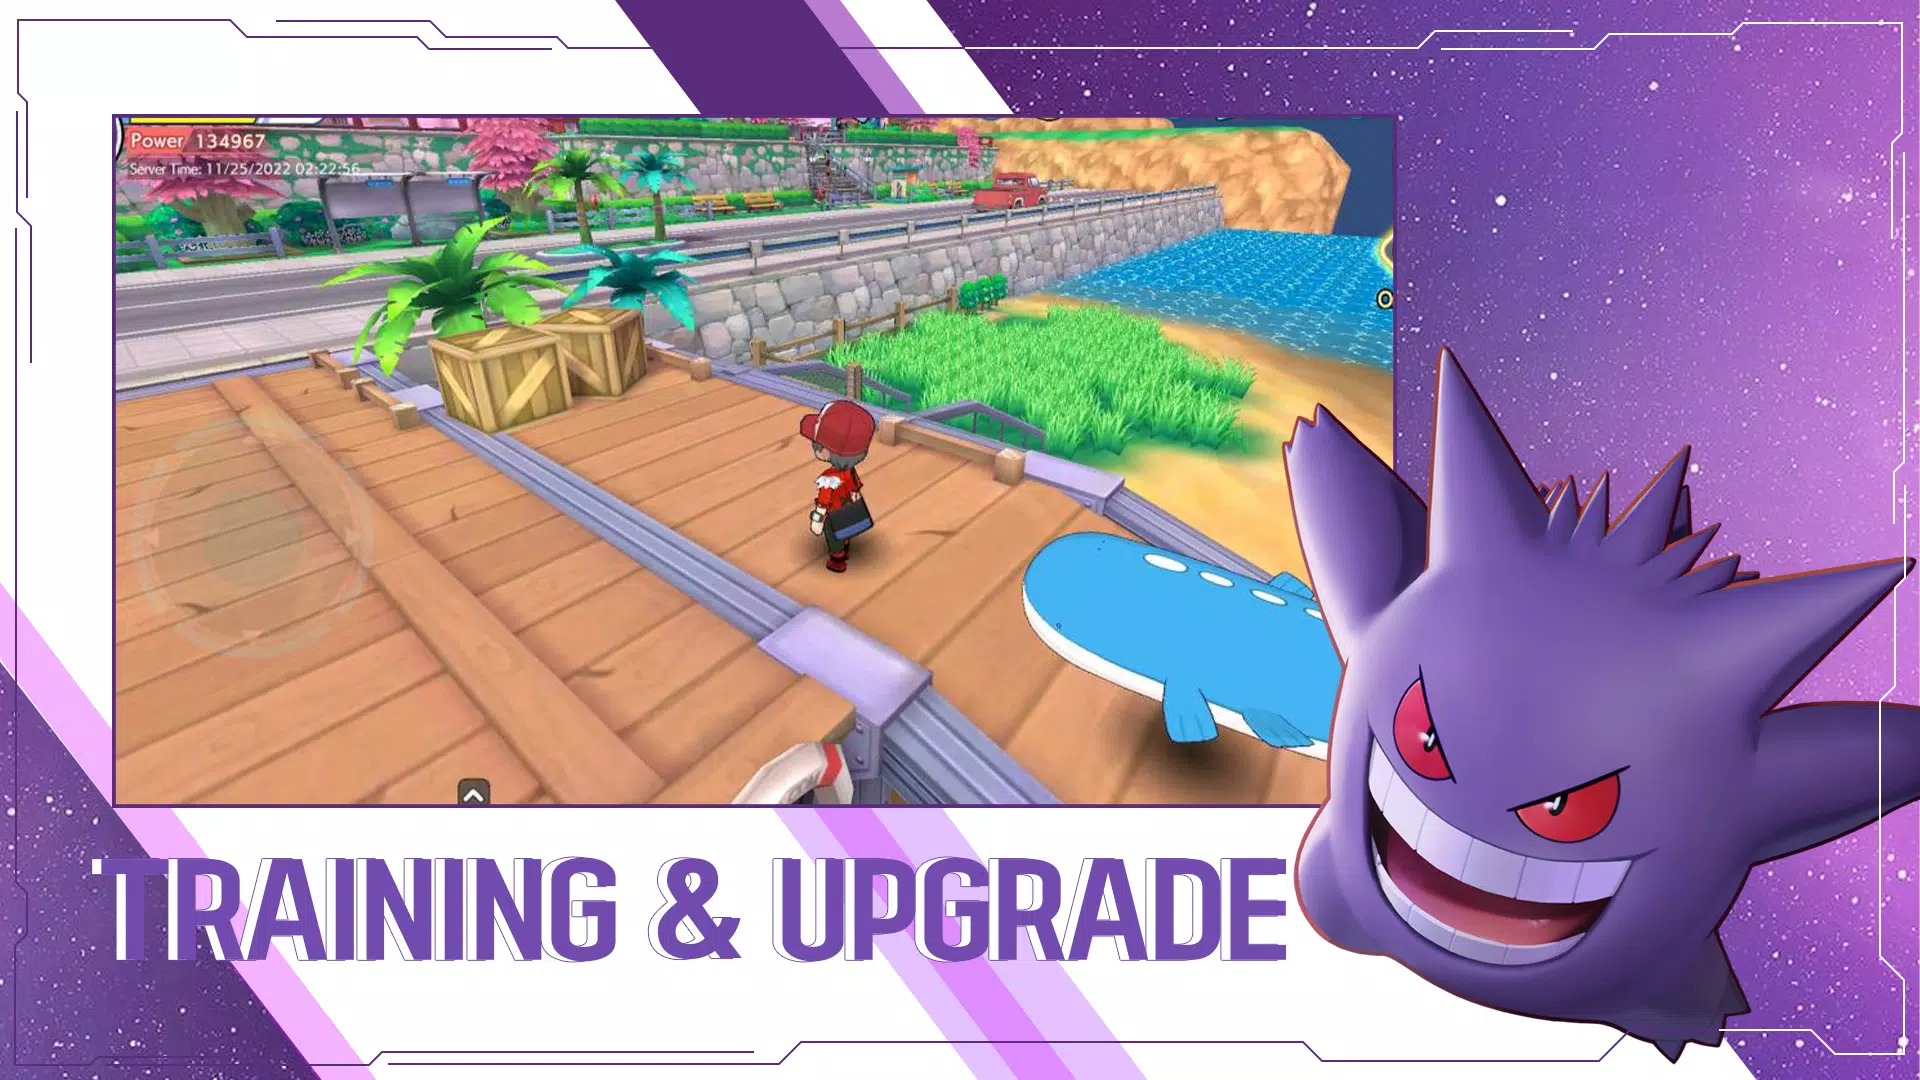 Pokemon Sword and Shield APK 1.0 Download For Android